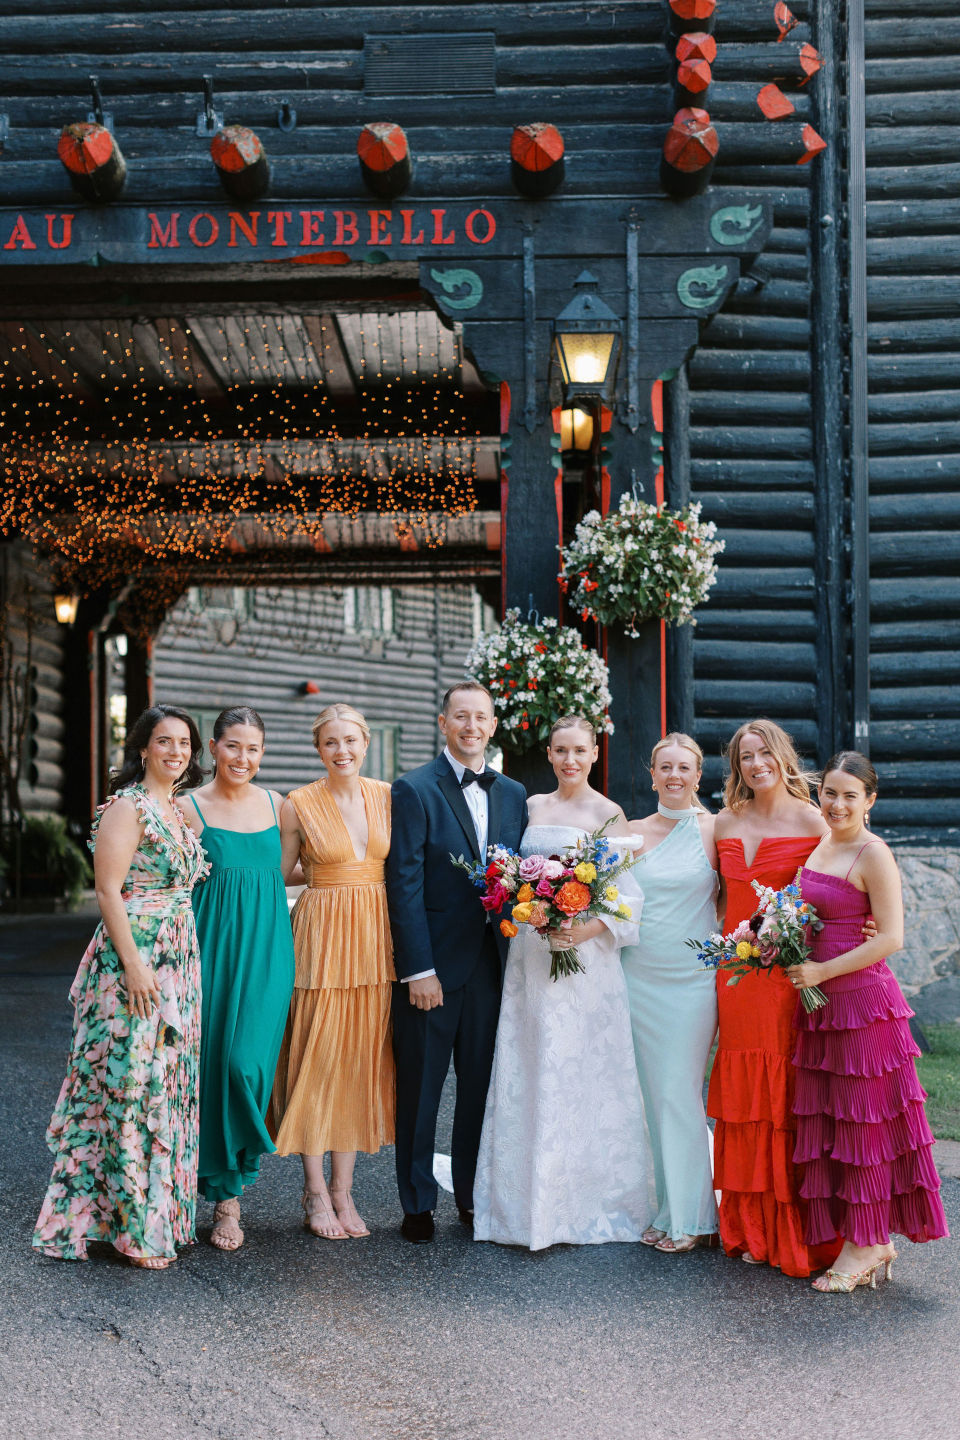 Colourful Summer Wedding | Fairmont Le Chateau Montebello | Erica Irwin Weddings and Events | Scott H Wilson Photography